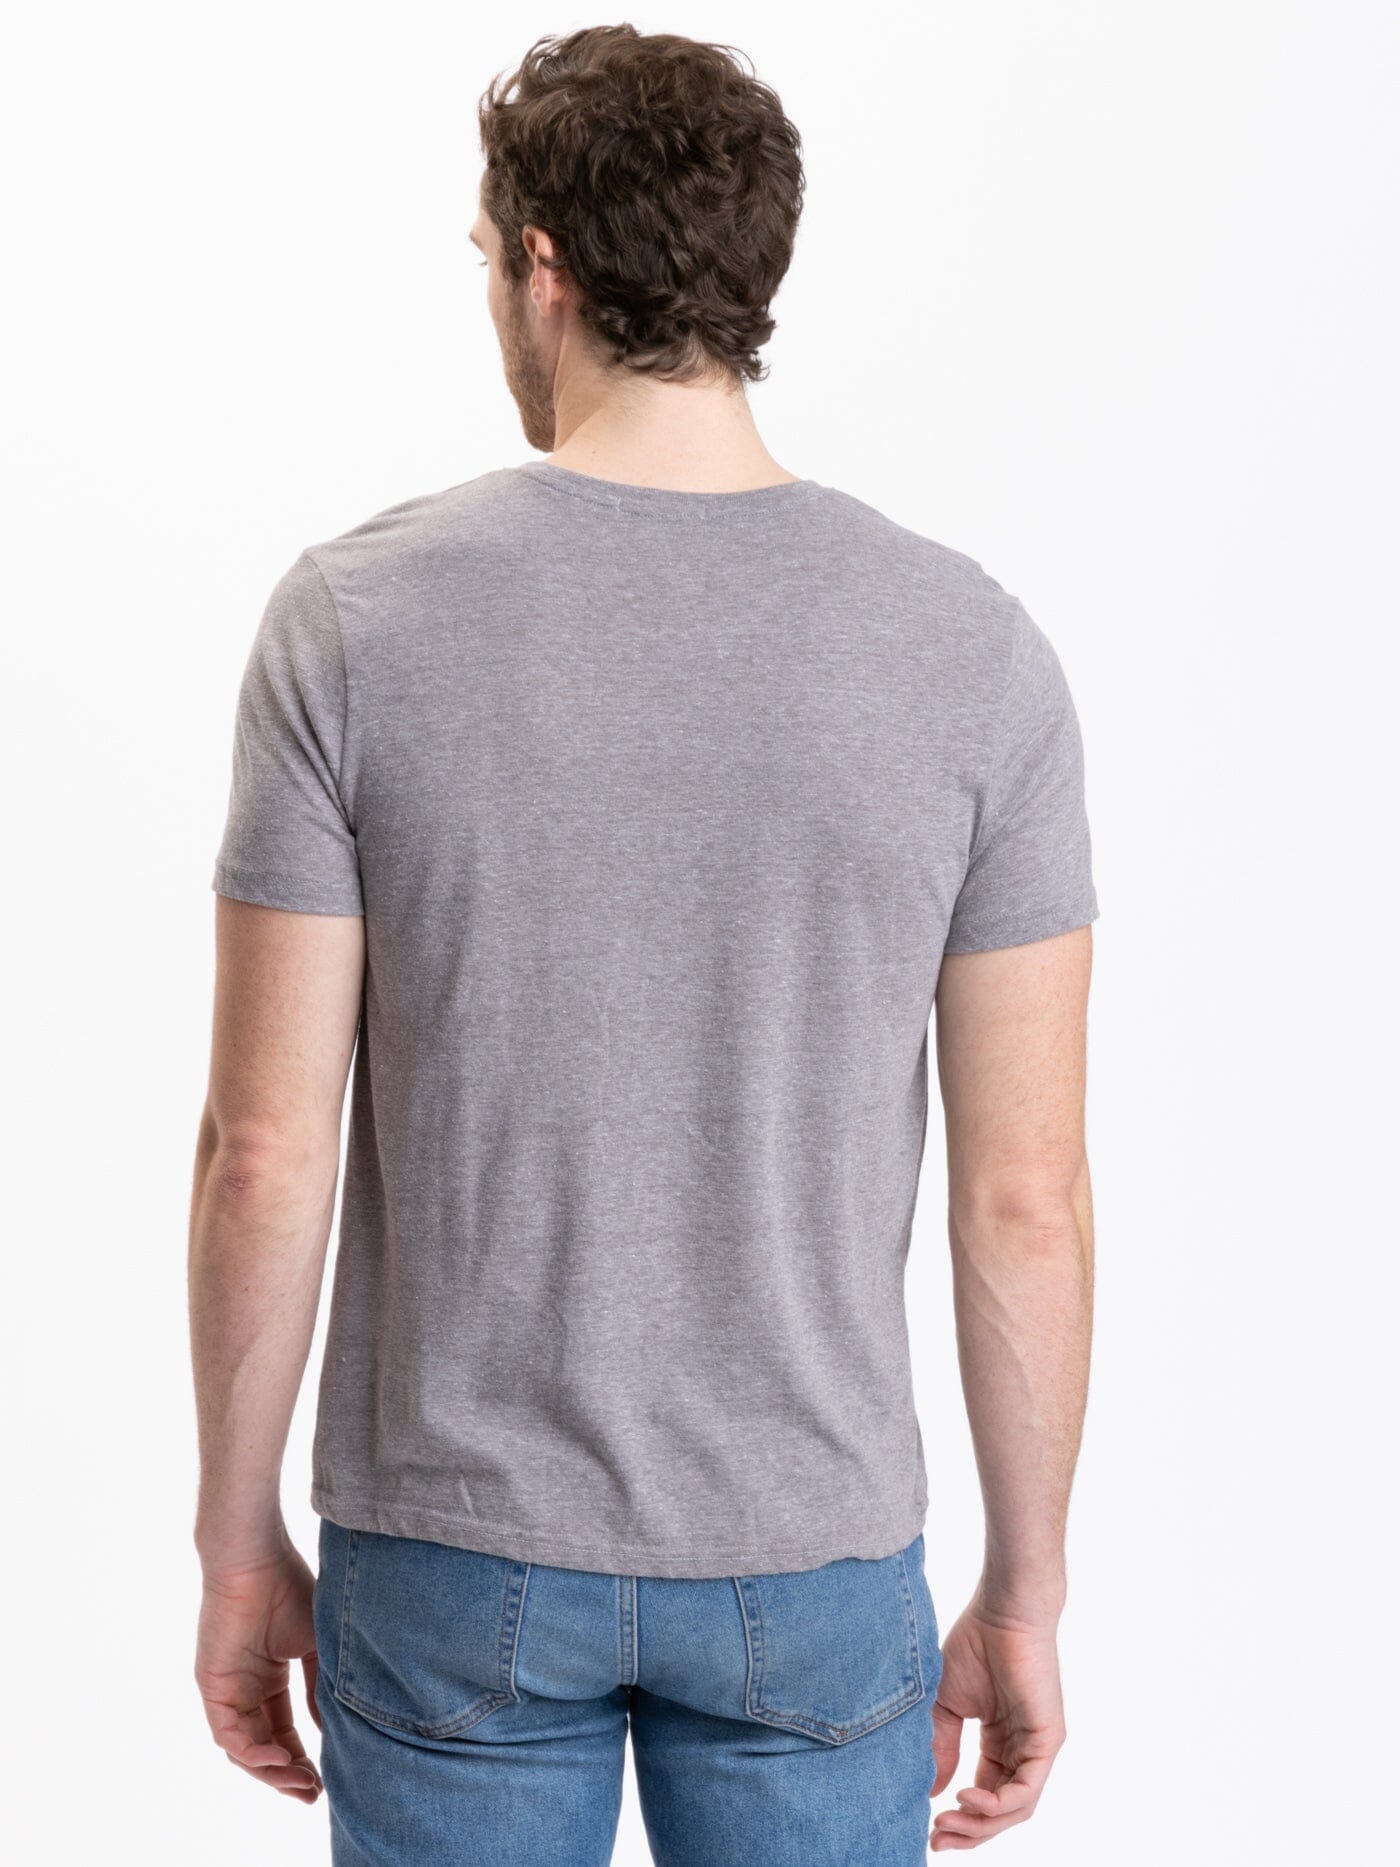 Triblend Crew Neck Tee in Grey – Heather 4 Thought Threads